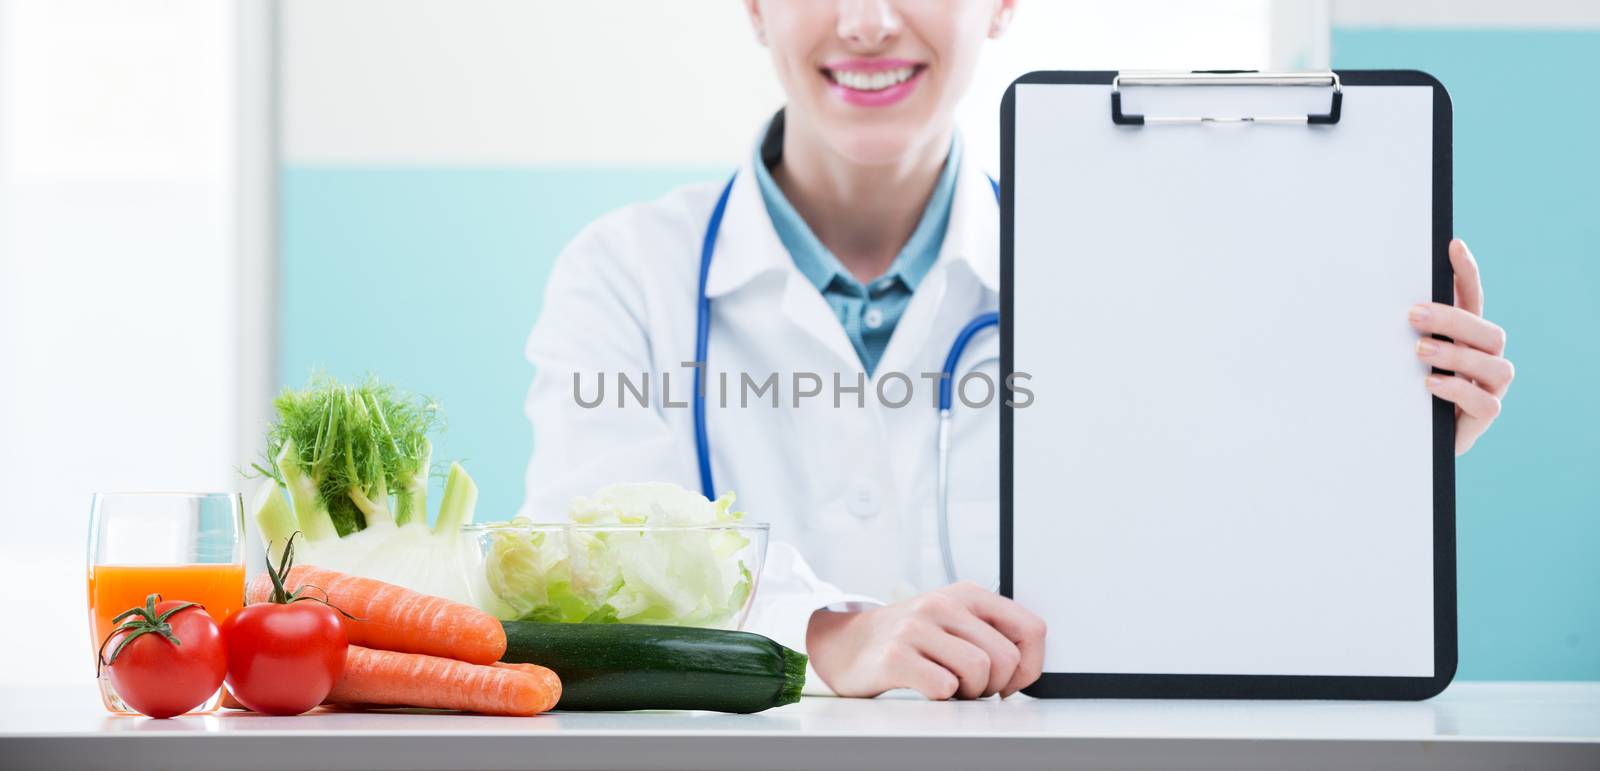 Cheerful healthcare professional promoting healthy eating